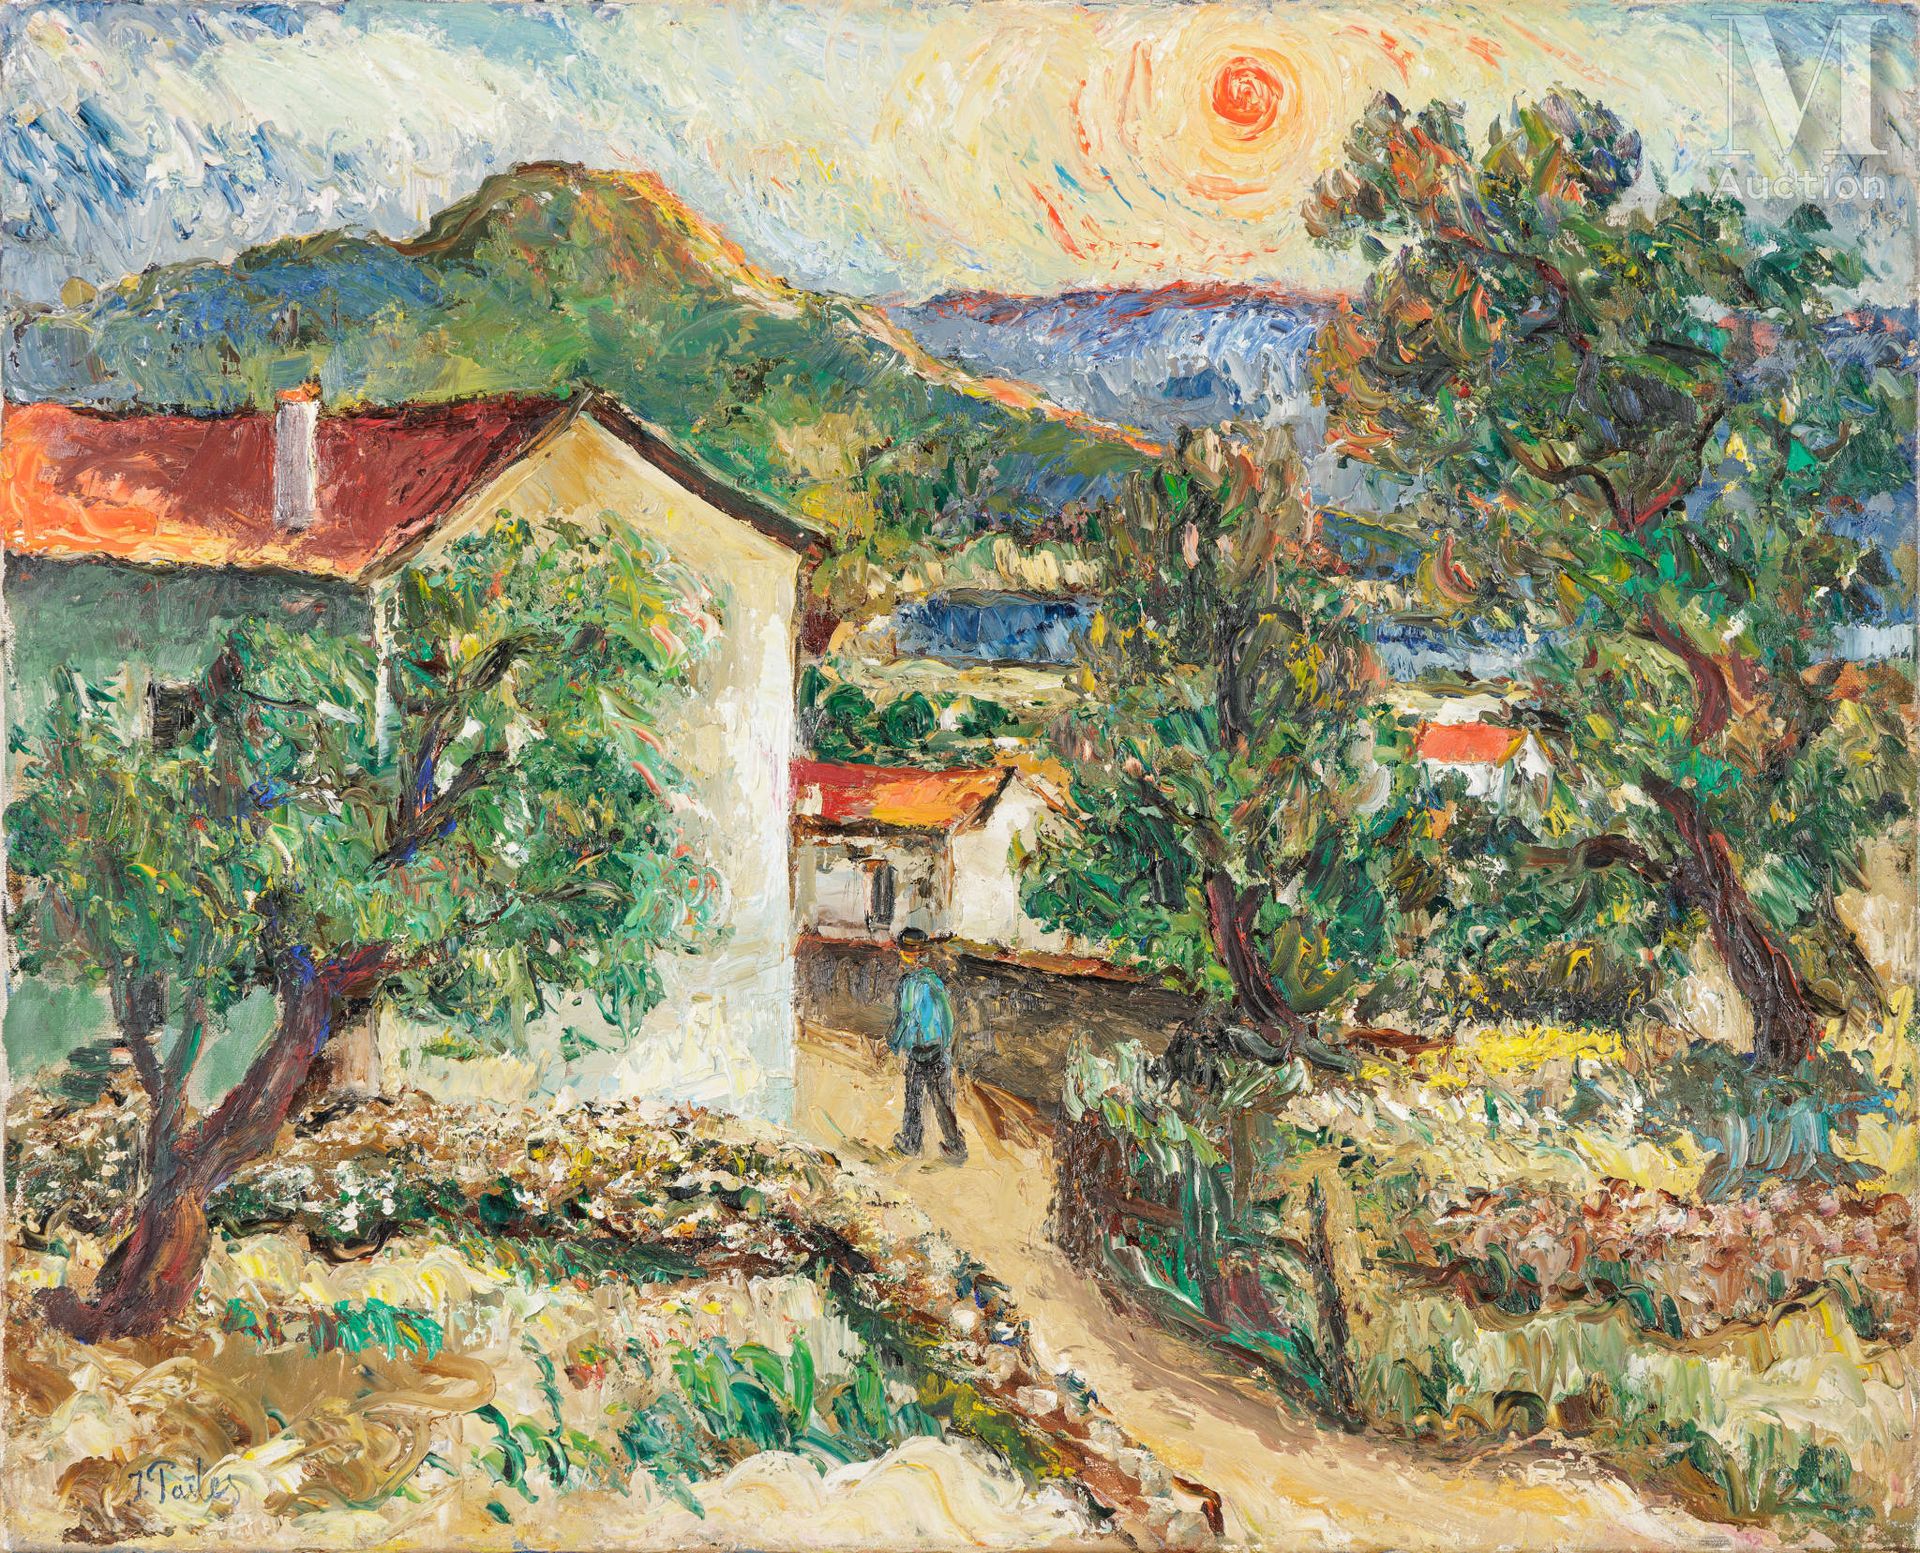 Isaac PAÏLES (Kiev 1895-France 1978) Landscape of the south of France

Oil on ca&hellip;